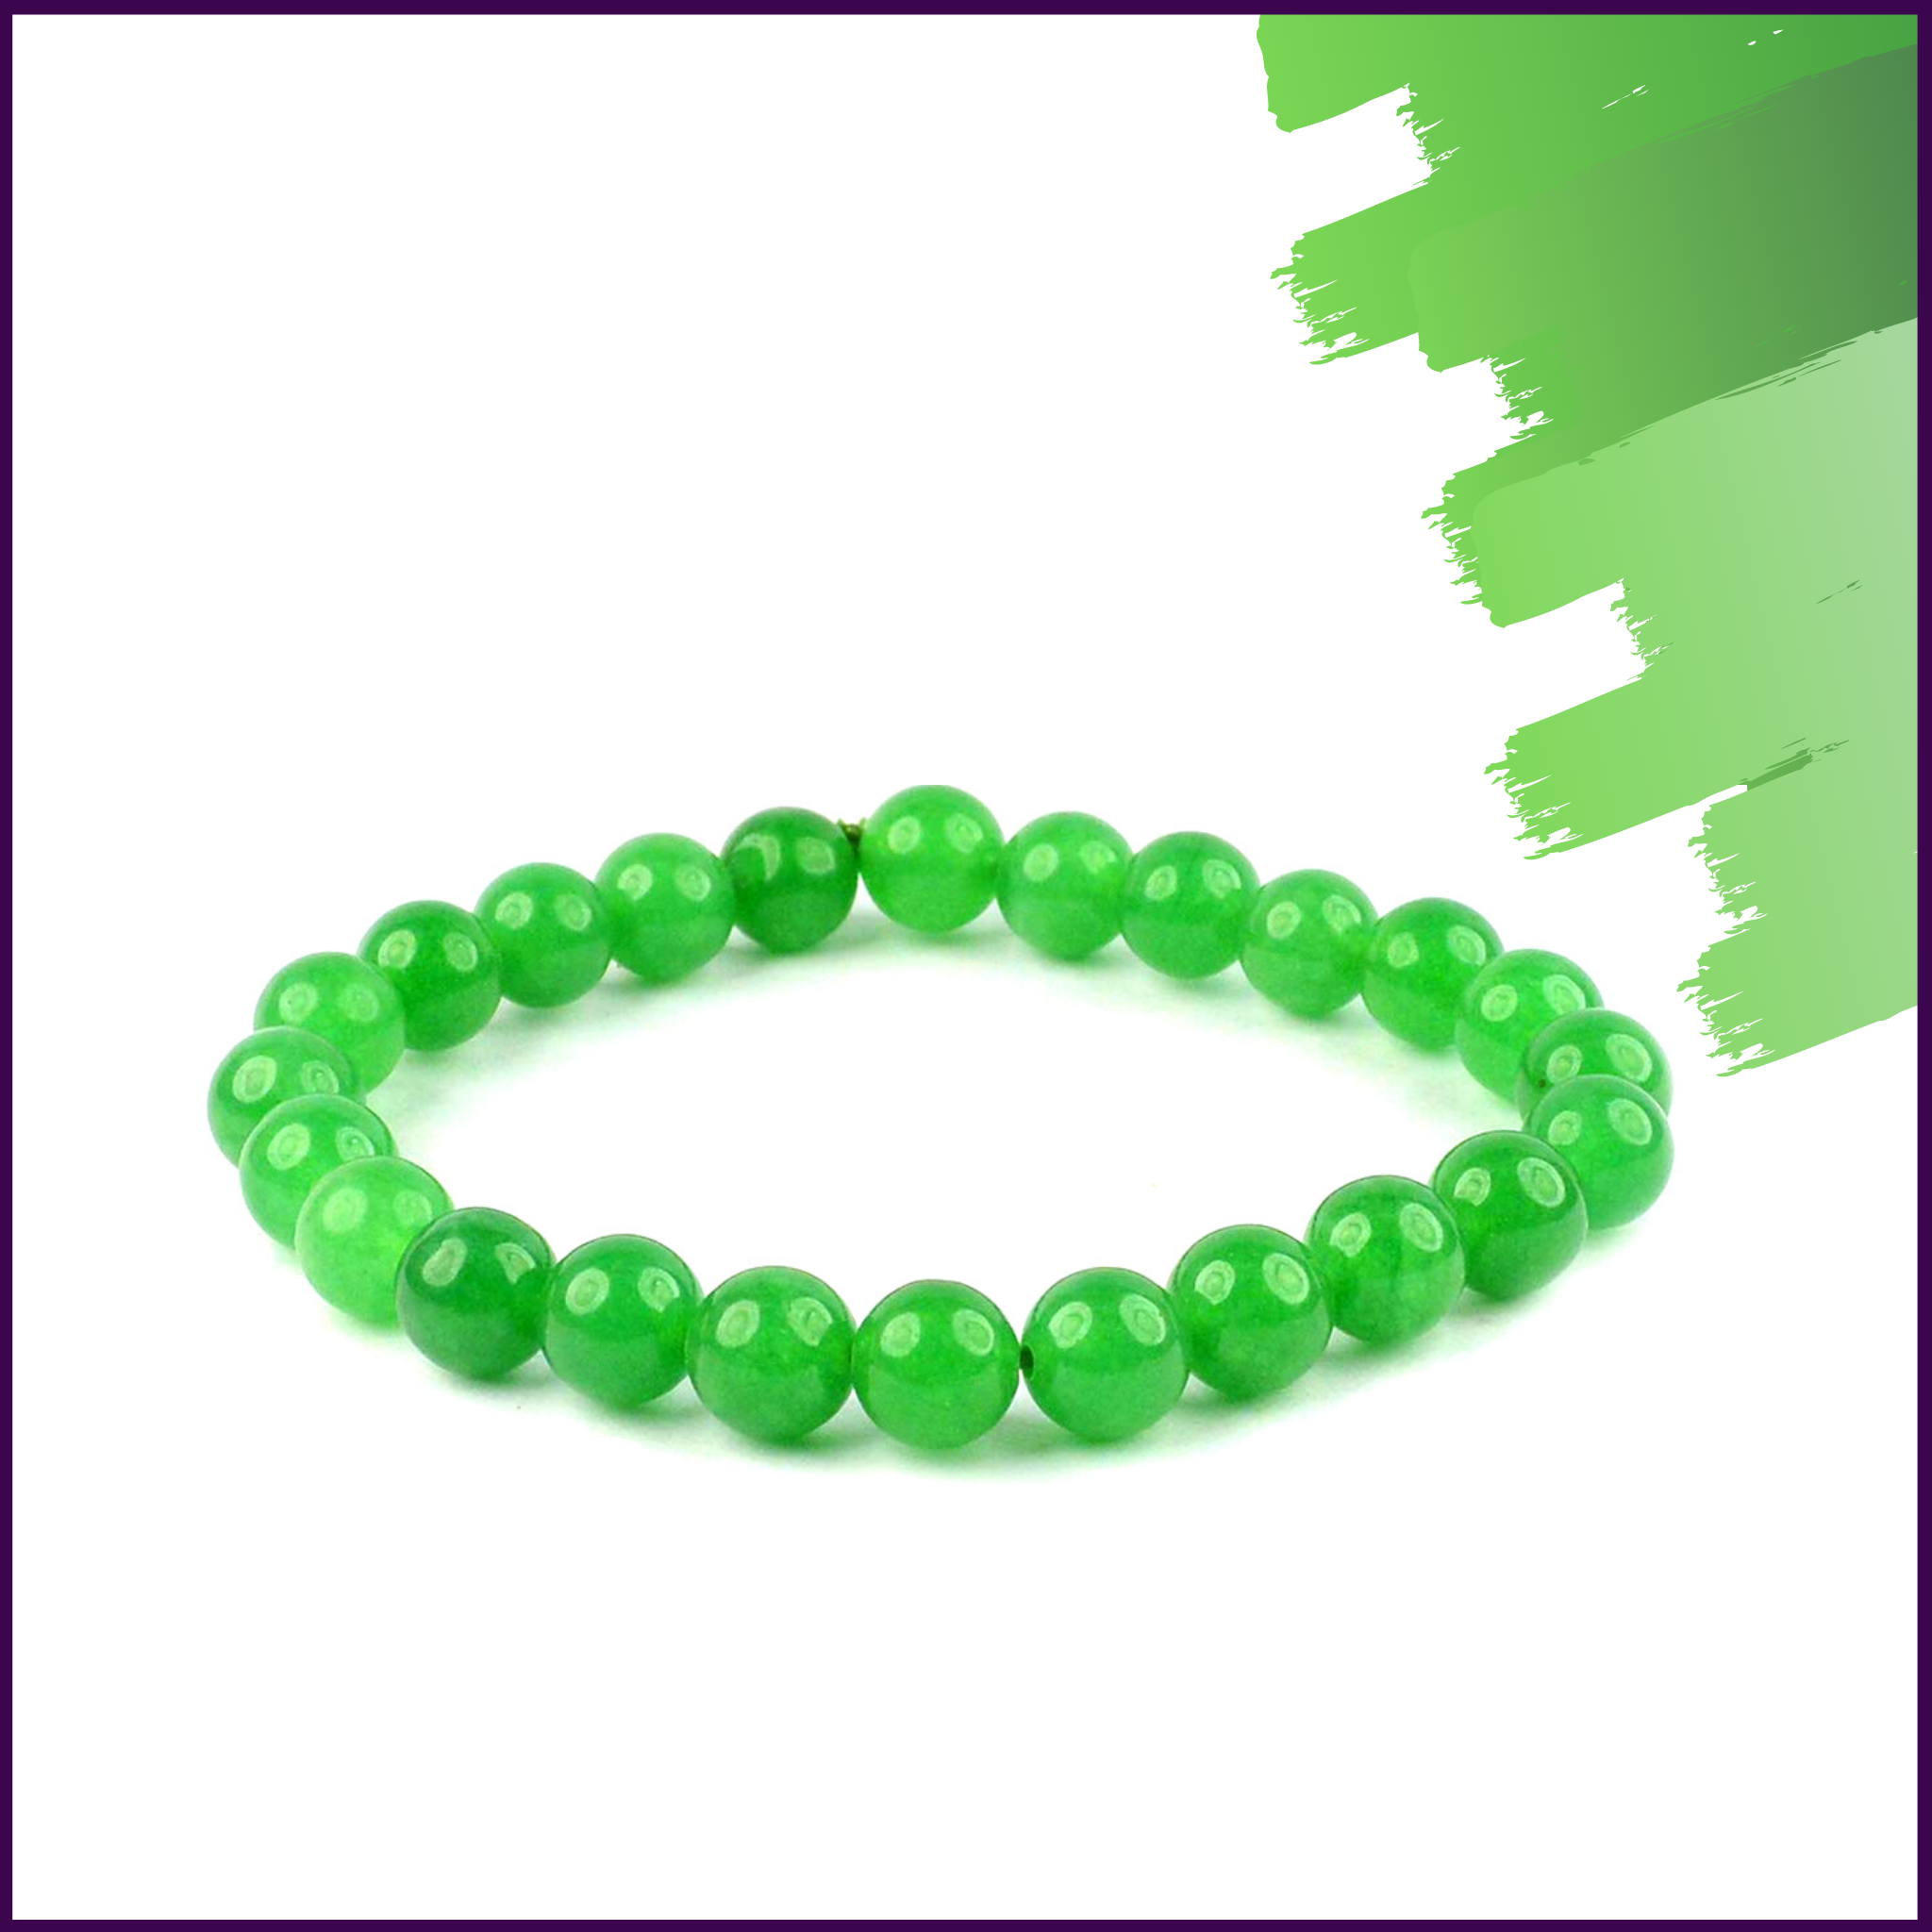 Emerald Bracelet Crystal For Enhancing Clairvoyance & Psychic Abilities - 51pyramids